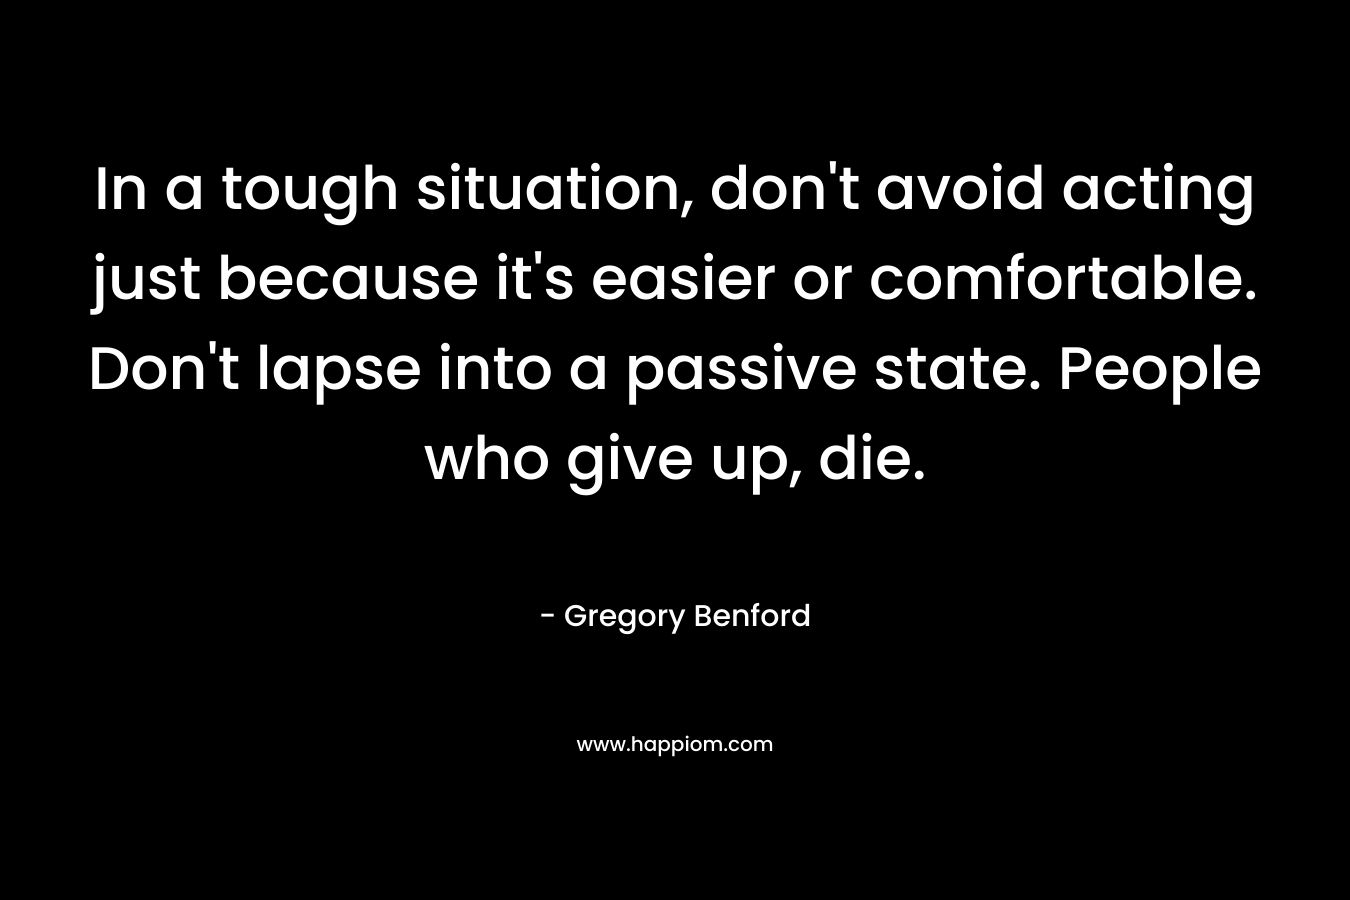 In a tough situation, don’t avoid acting just because it’s easier or comfortable. Don’t lapse into a passive state. People who give up, die. – Gregory Benford